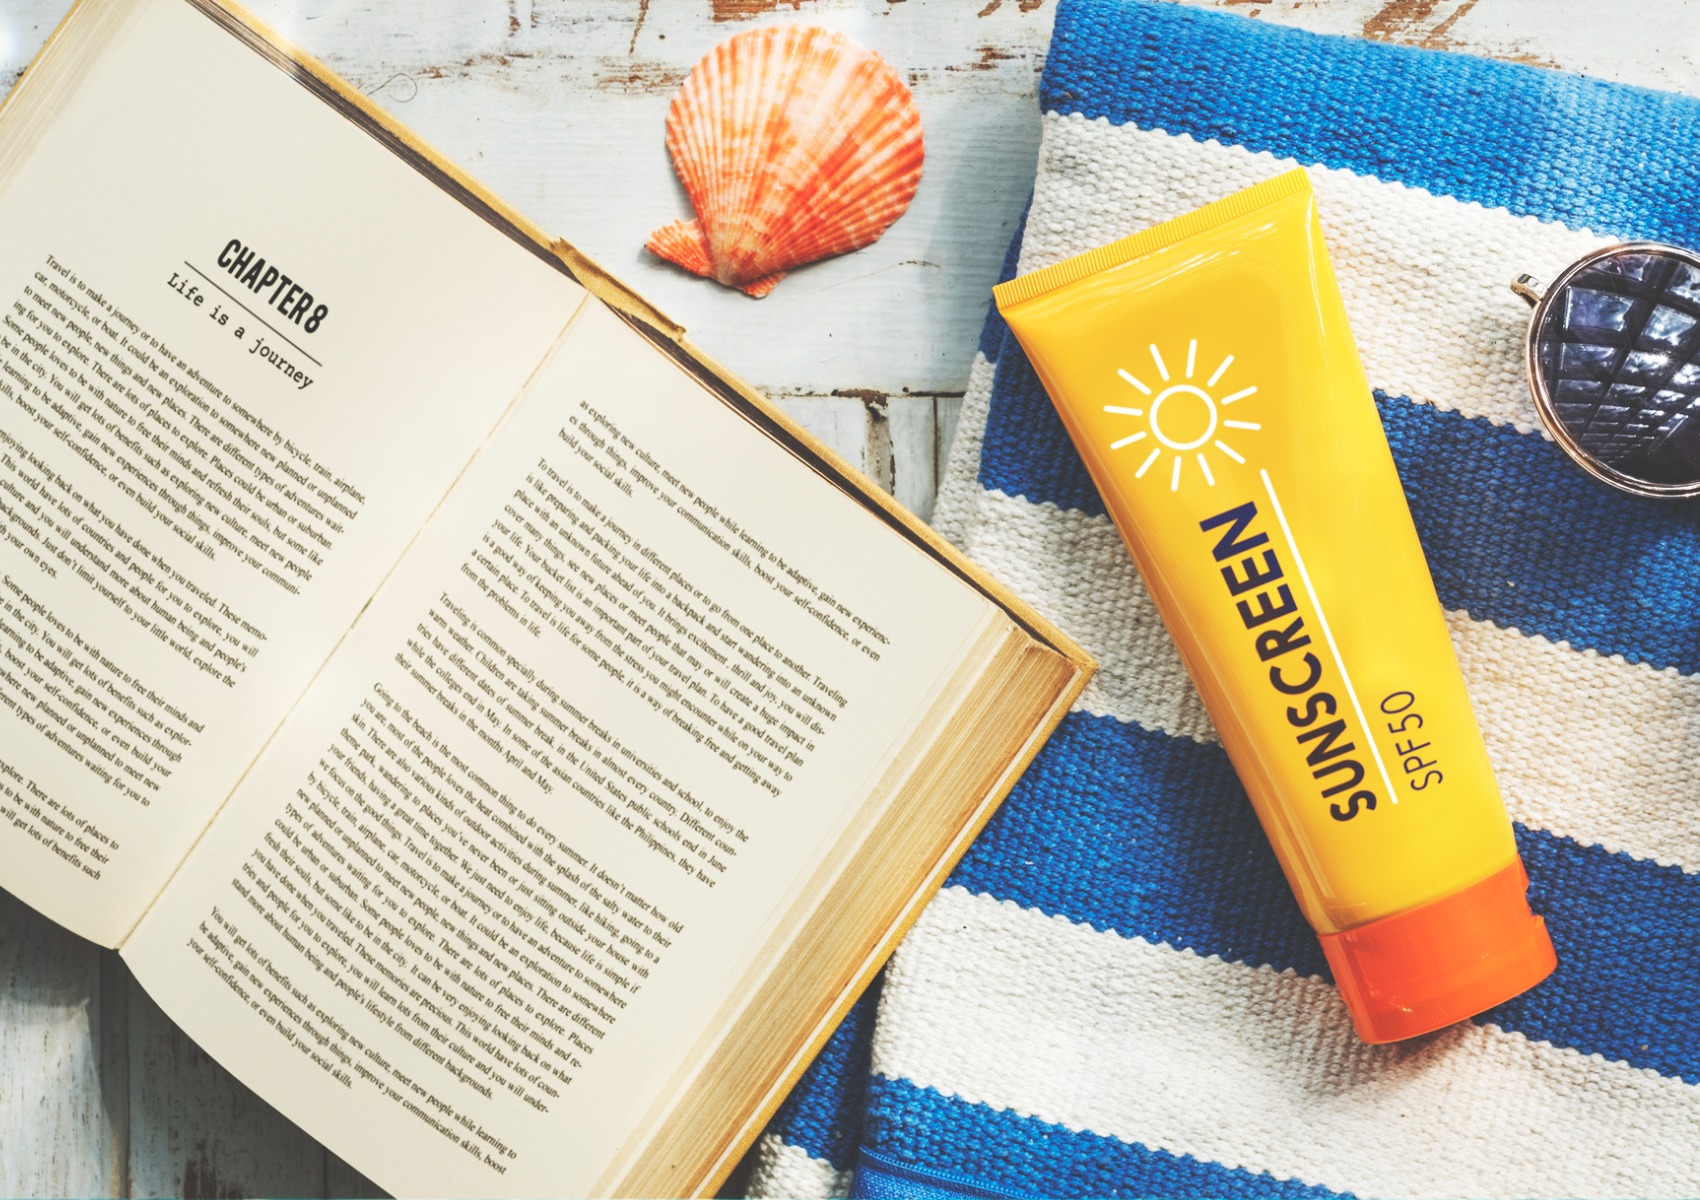 sunscreen-sunglasses-towel-book-recess-relax-concept-picture-id621712484